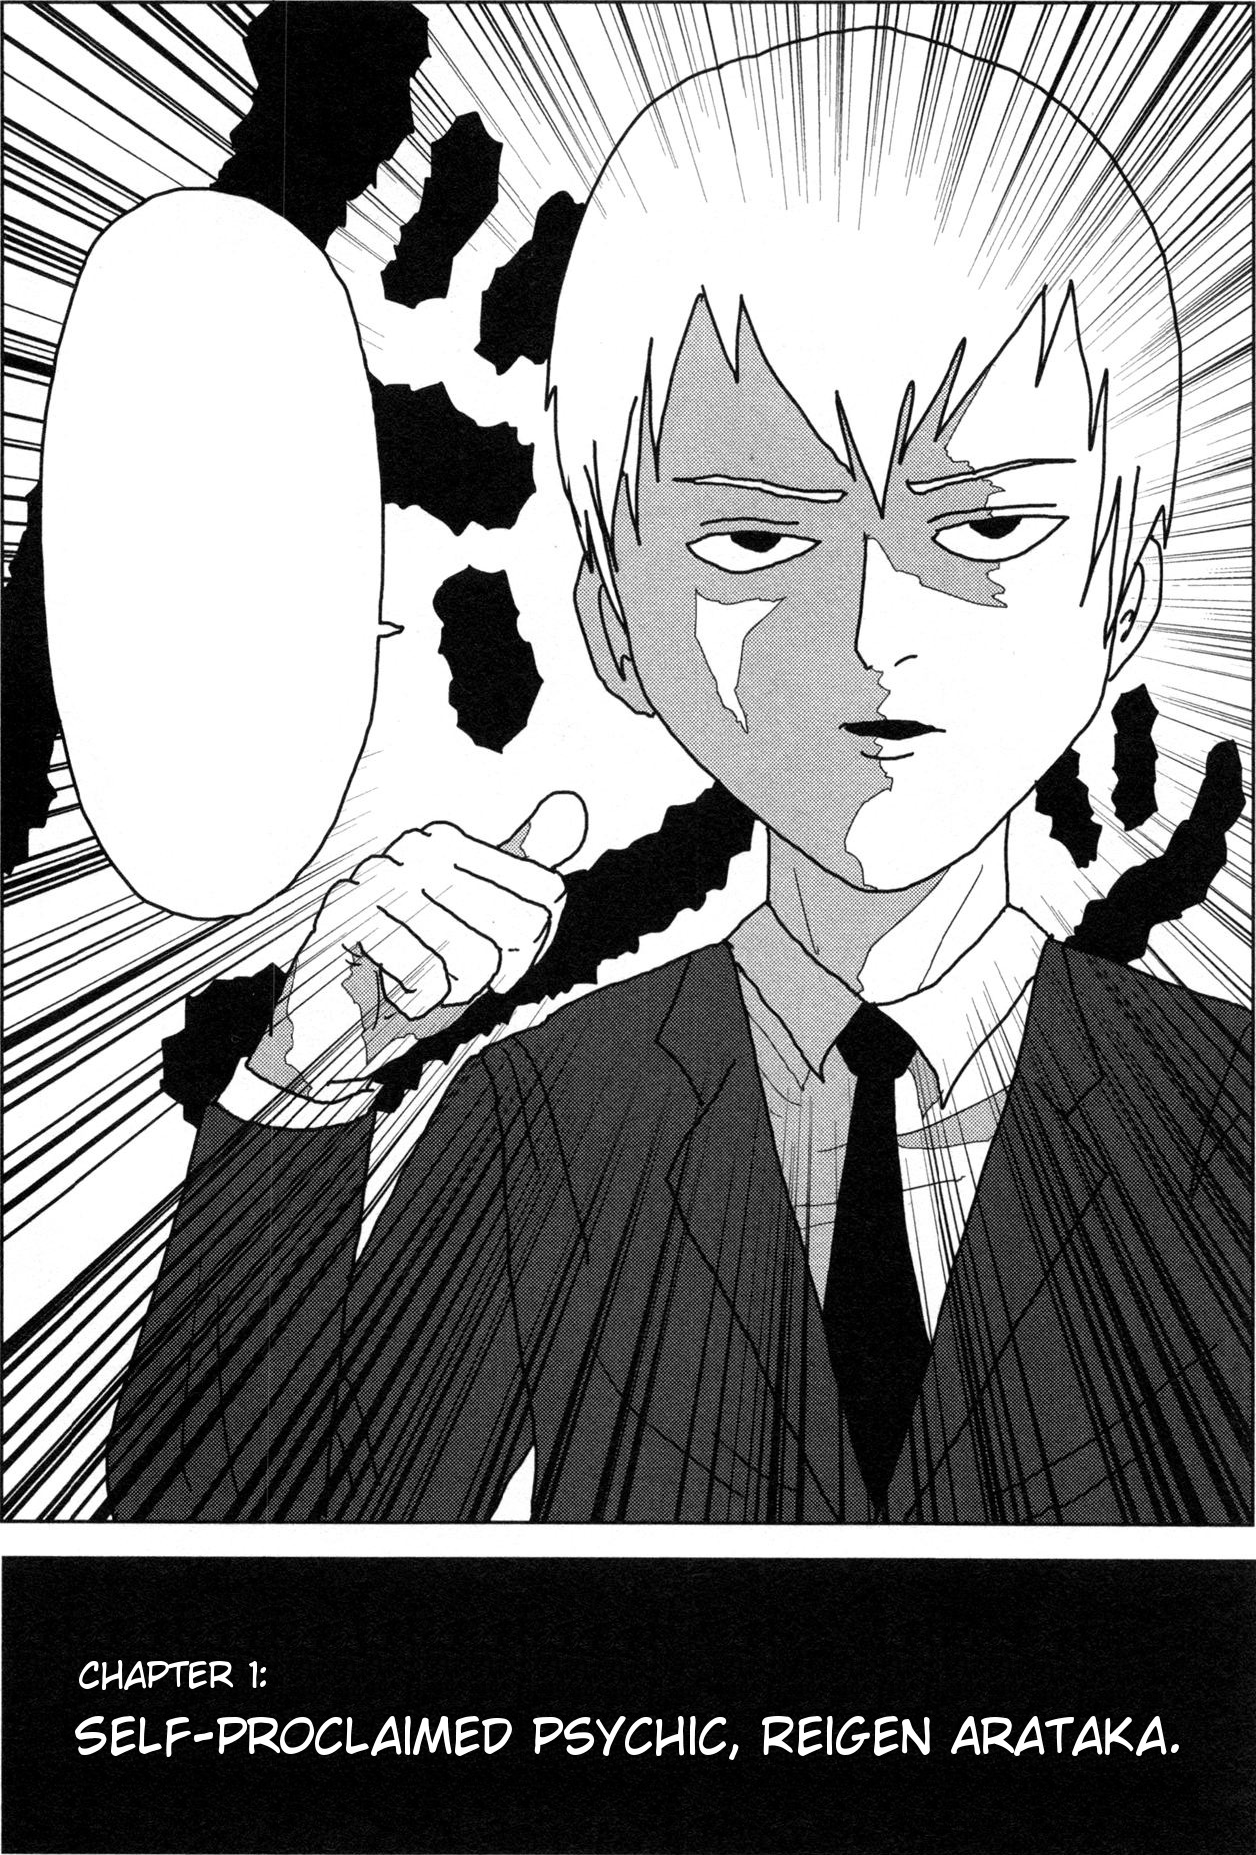 Sans From Undertale Vs Reigen From Mob Psycho 100 Tumblr Sexiness  Contest Results Goes Viral  That Hashtag Show